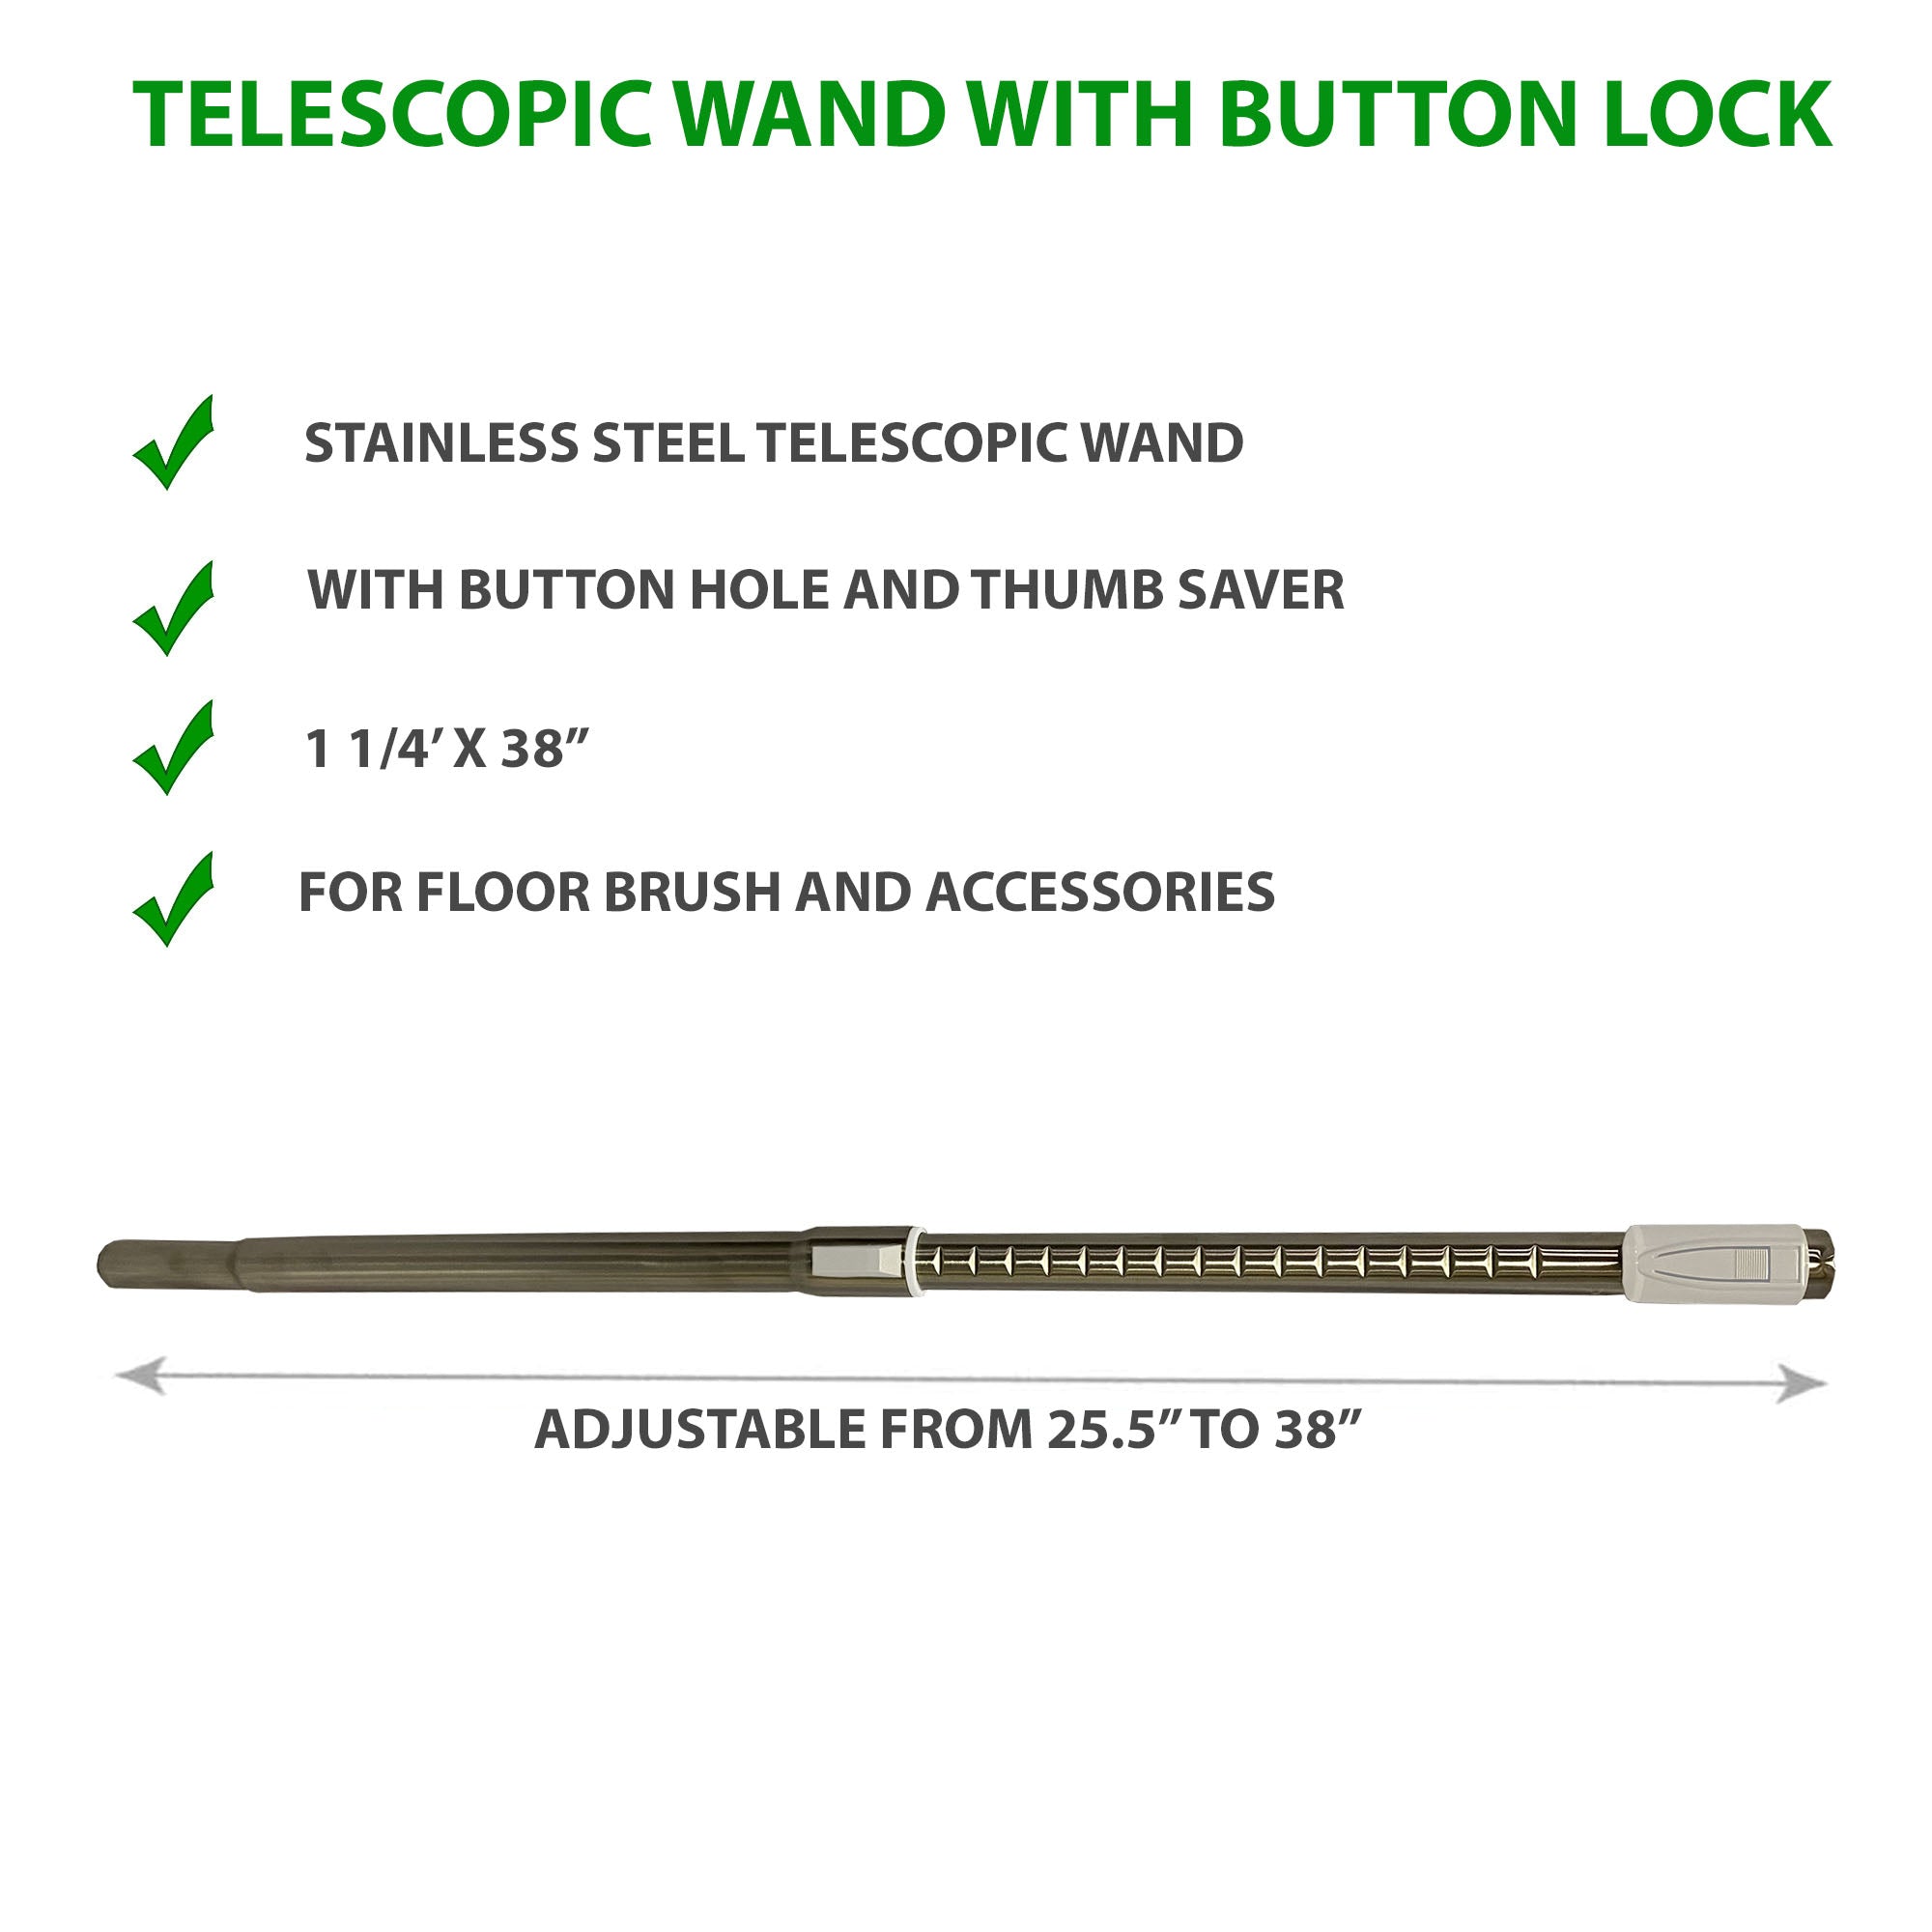 Telescopic Wand with Button Lock